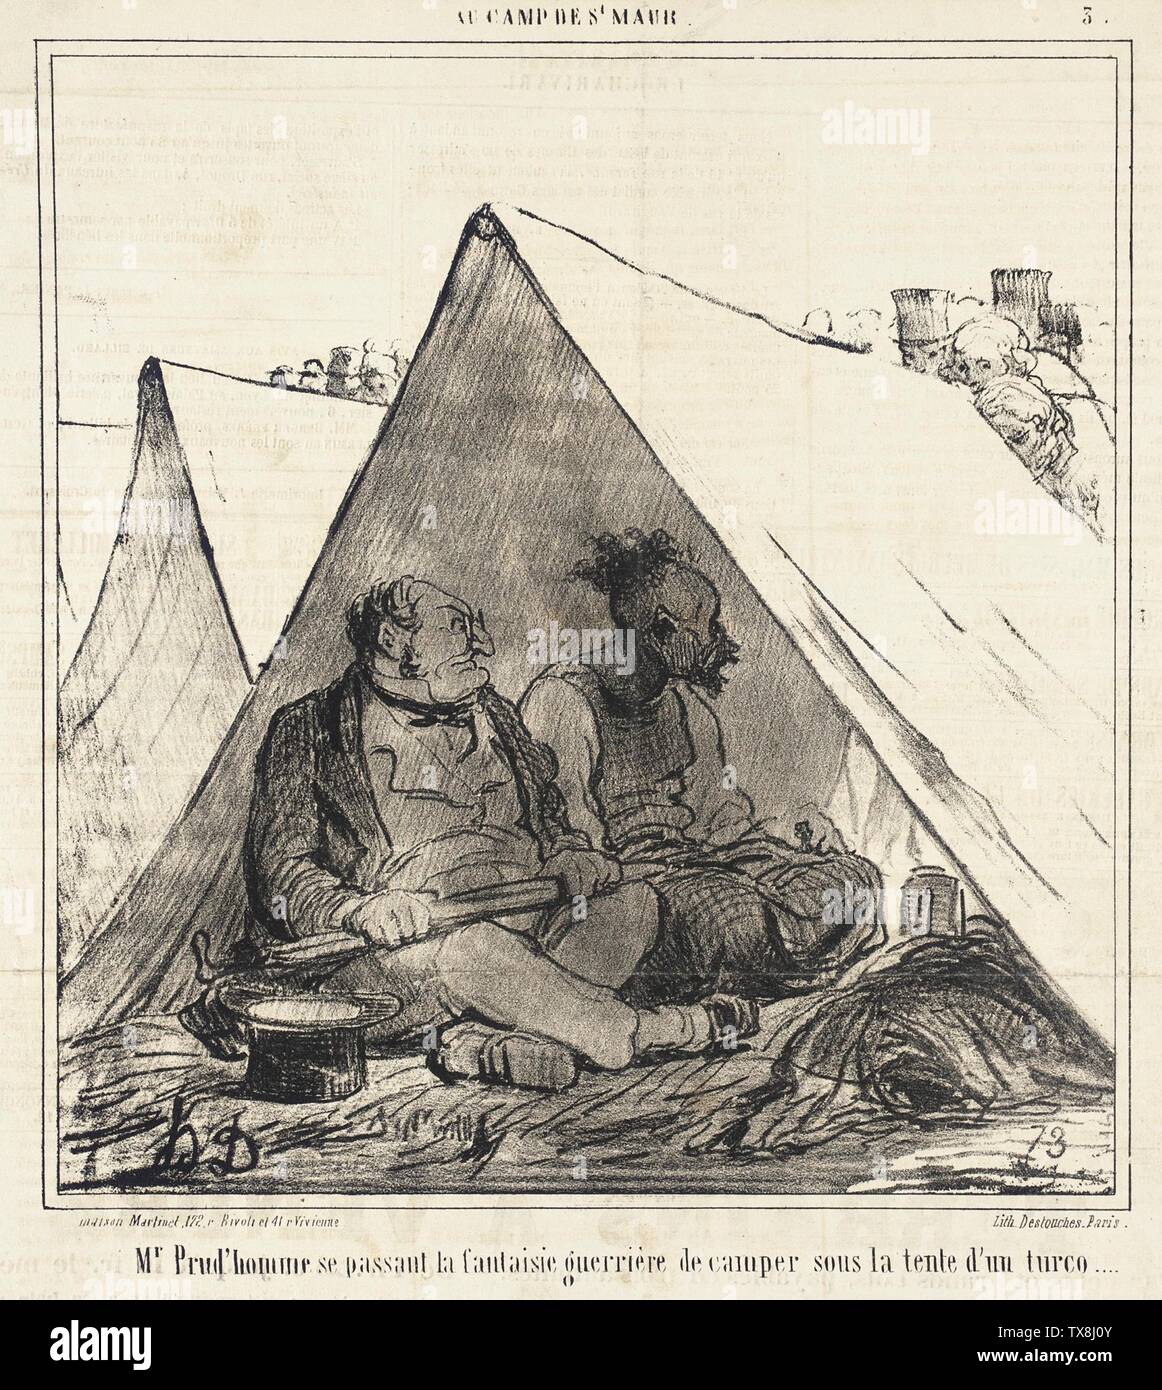 M. Prud'homme se passant la fantaisie...;  France, 1859 Series: Au Camp de Saint-Maur Periodical: Le Charivari, 18 August 1859 Prints; lithographs Lithograph Sheet: 9 3/4 x 9 1/16 in. (24.78 x 23.02 cm) Gift of Mrs. Florence Victor from The David and Florence Victor Collection (M.91.82.312) Prints and Drawings; 1859date QS:P571,+1859-00-00T00:00:00Z/9; Stock Photo